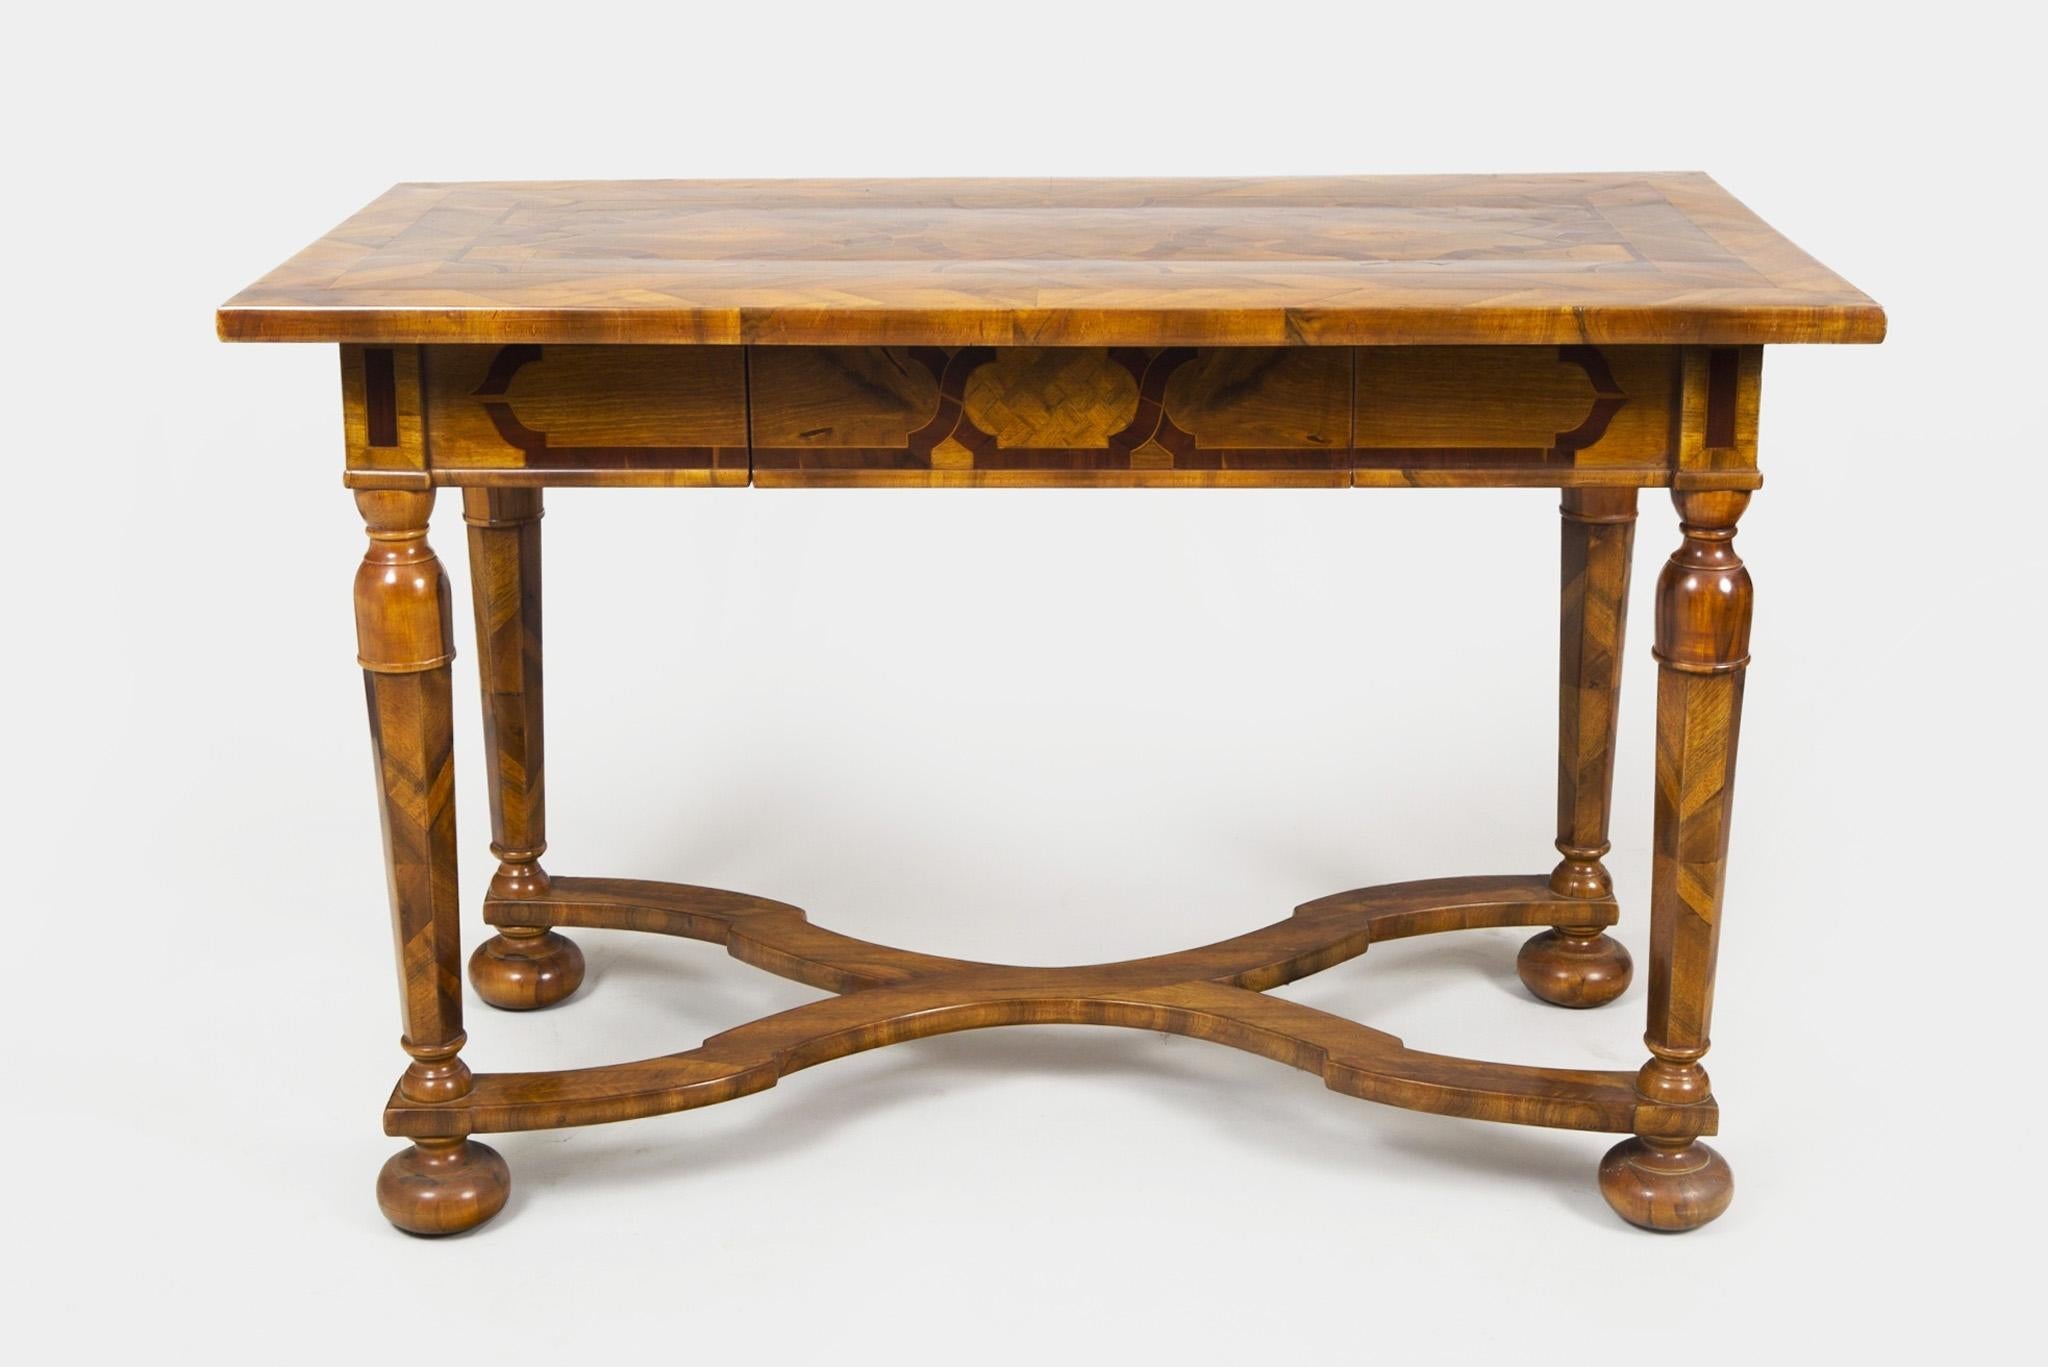 The table is made out of walnut and is inlaid. It has been fully restored by our team in Prague.